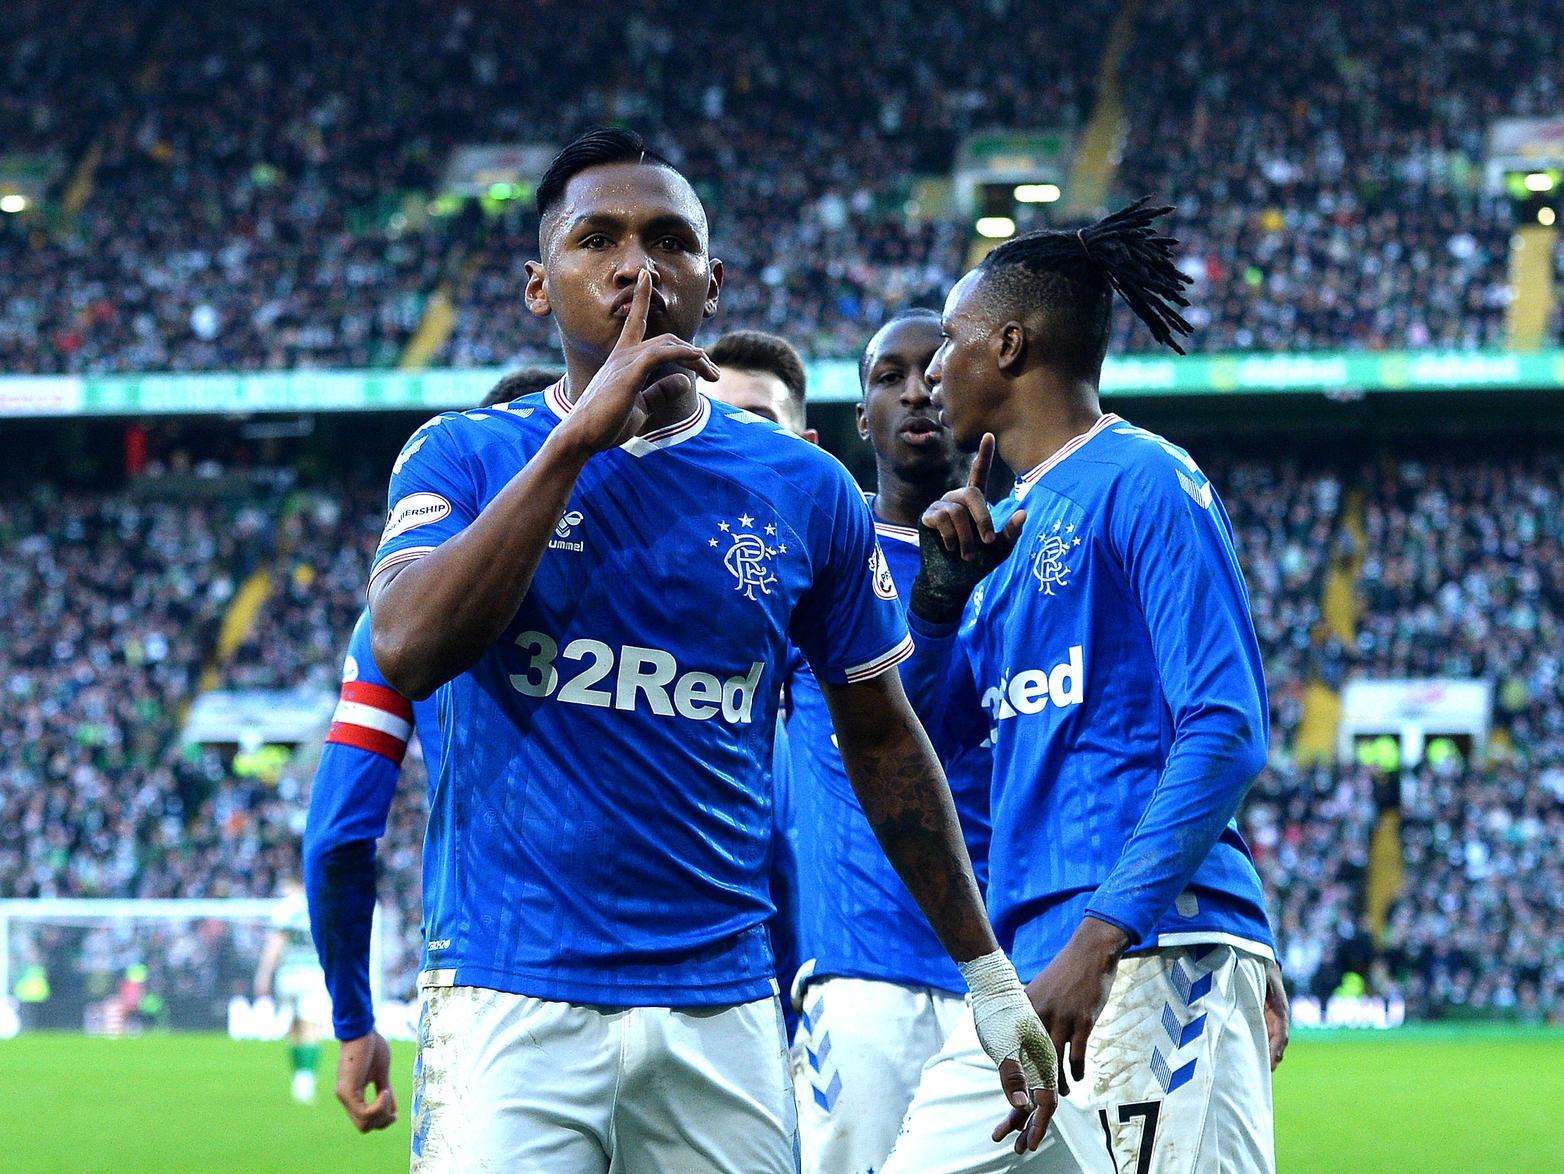 Odds: 20/1. A mighty long shot, this one. The Rangers striker is playing Europa League football, and could be part of the club's first top tier title winning campaign since 2011.